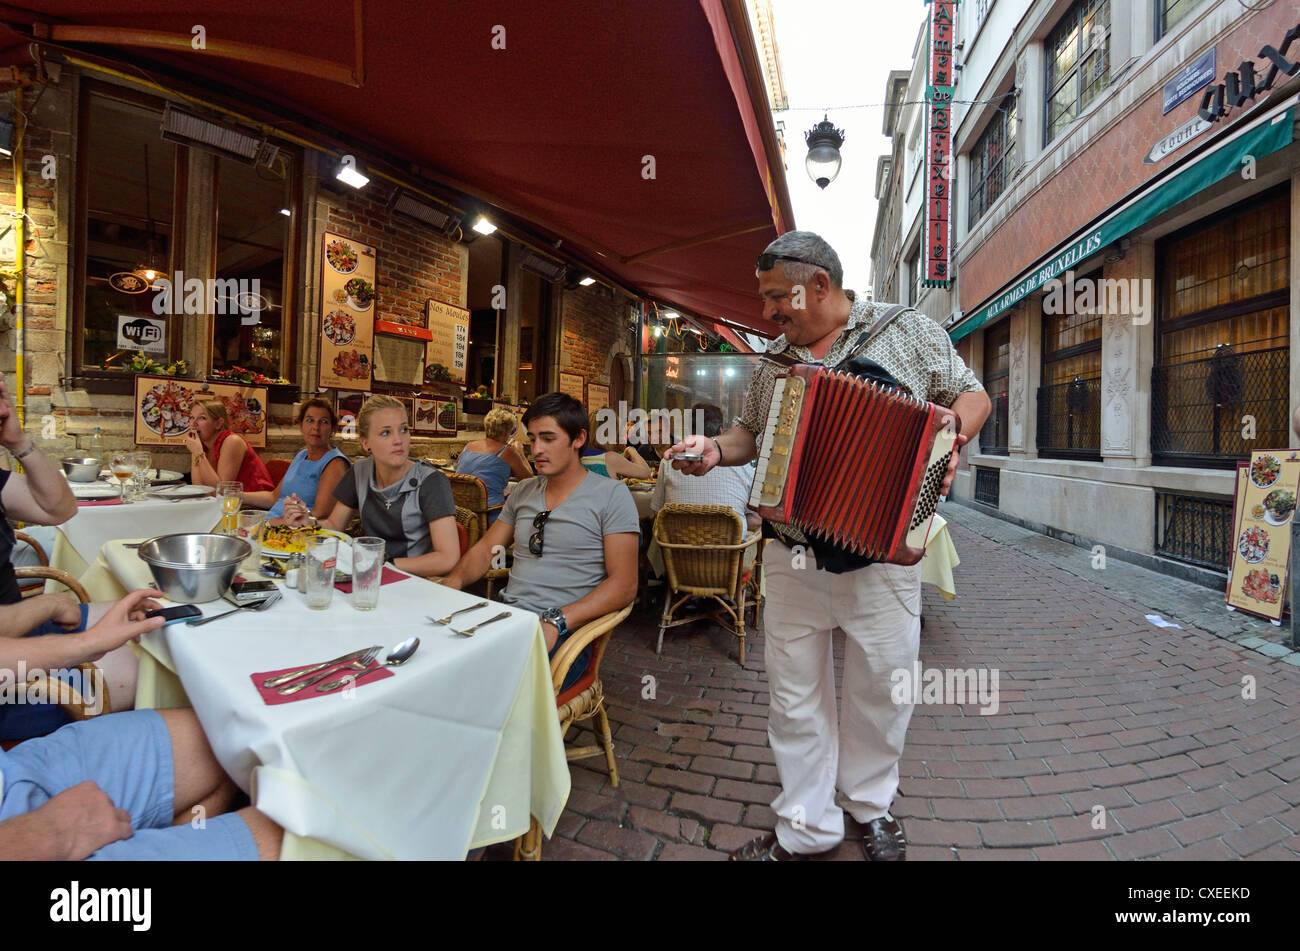 Brussels, Belgium. Busker with an accordion trying to get money from restaurant customers in the street Stock Photo